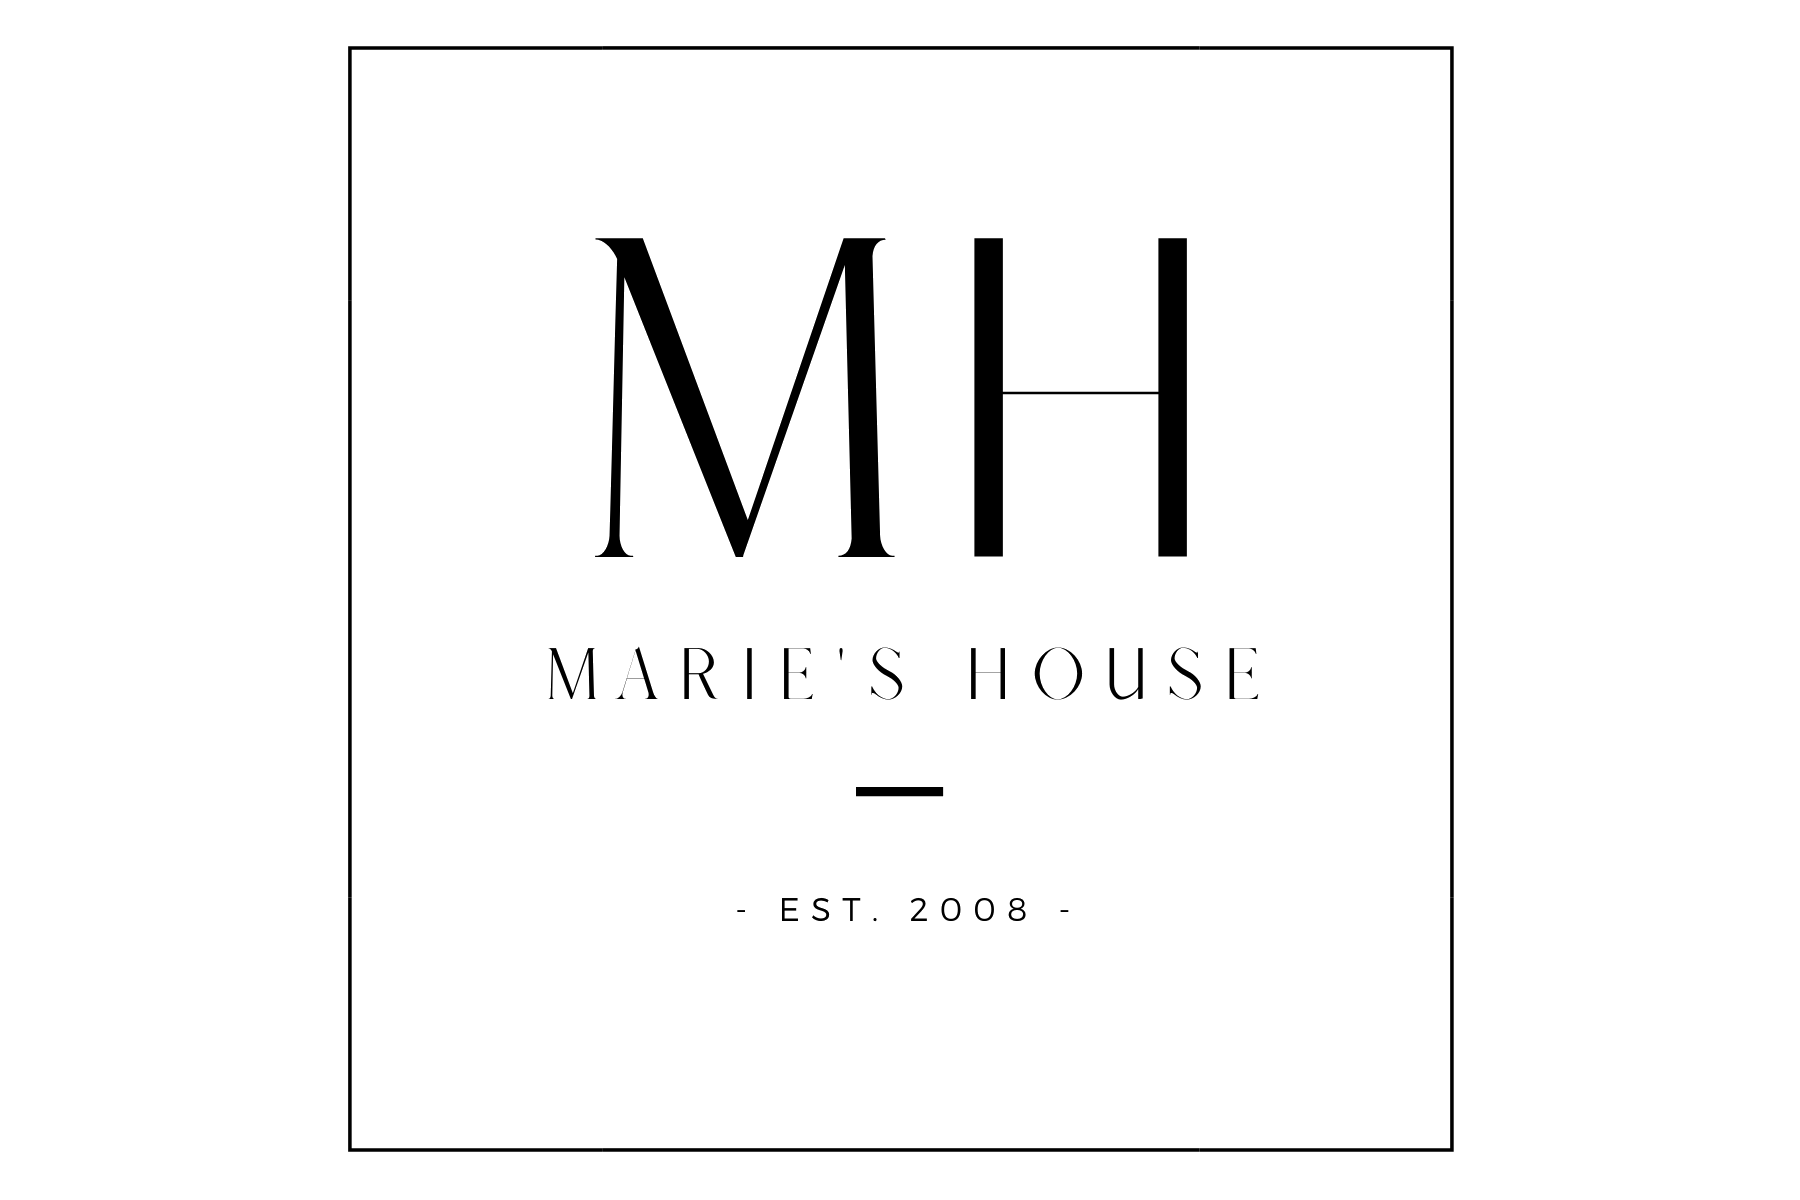 Marie's House Live Chat Service